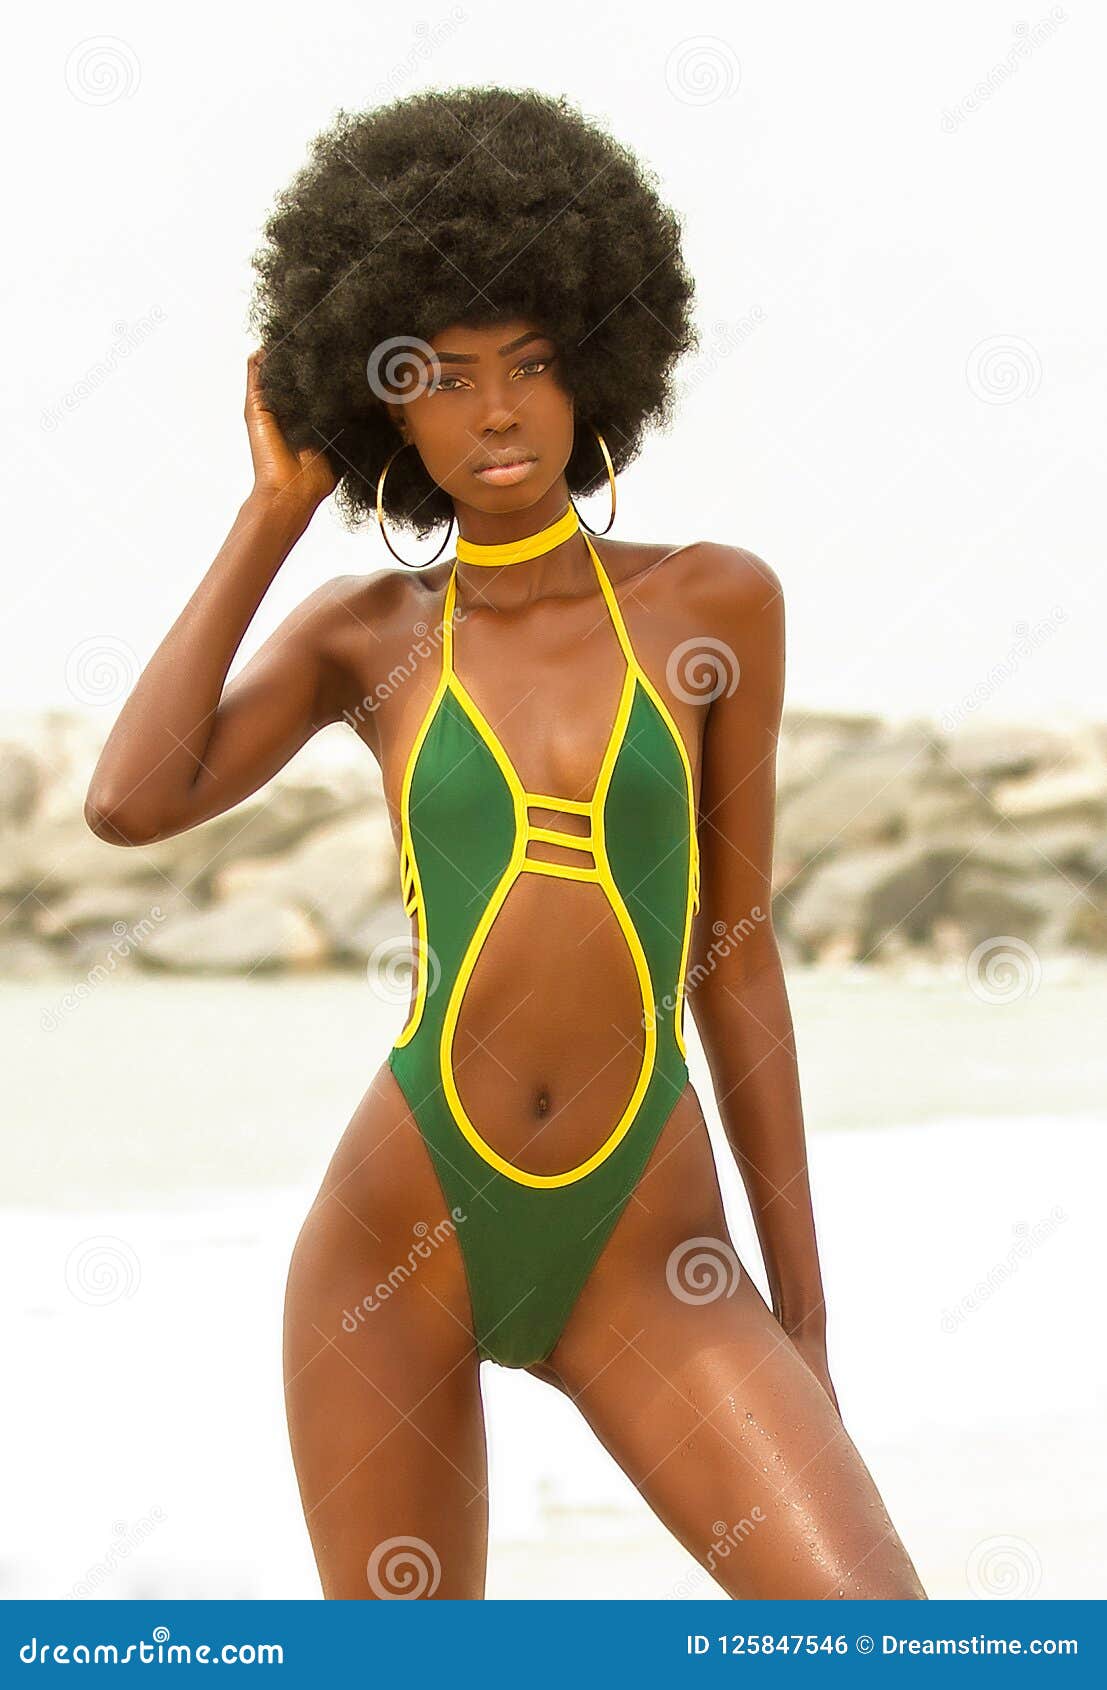 chris roome recommends black women in bathing suits pic